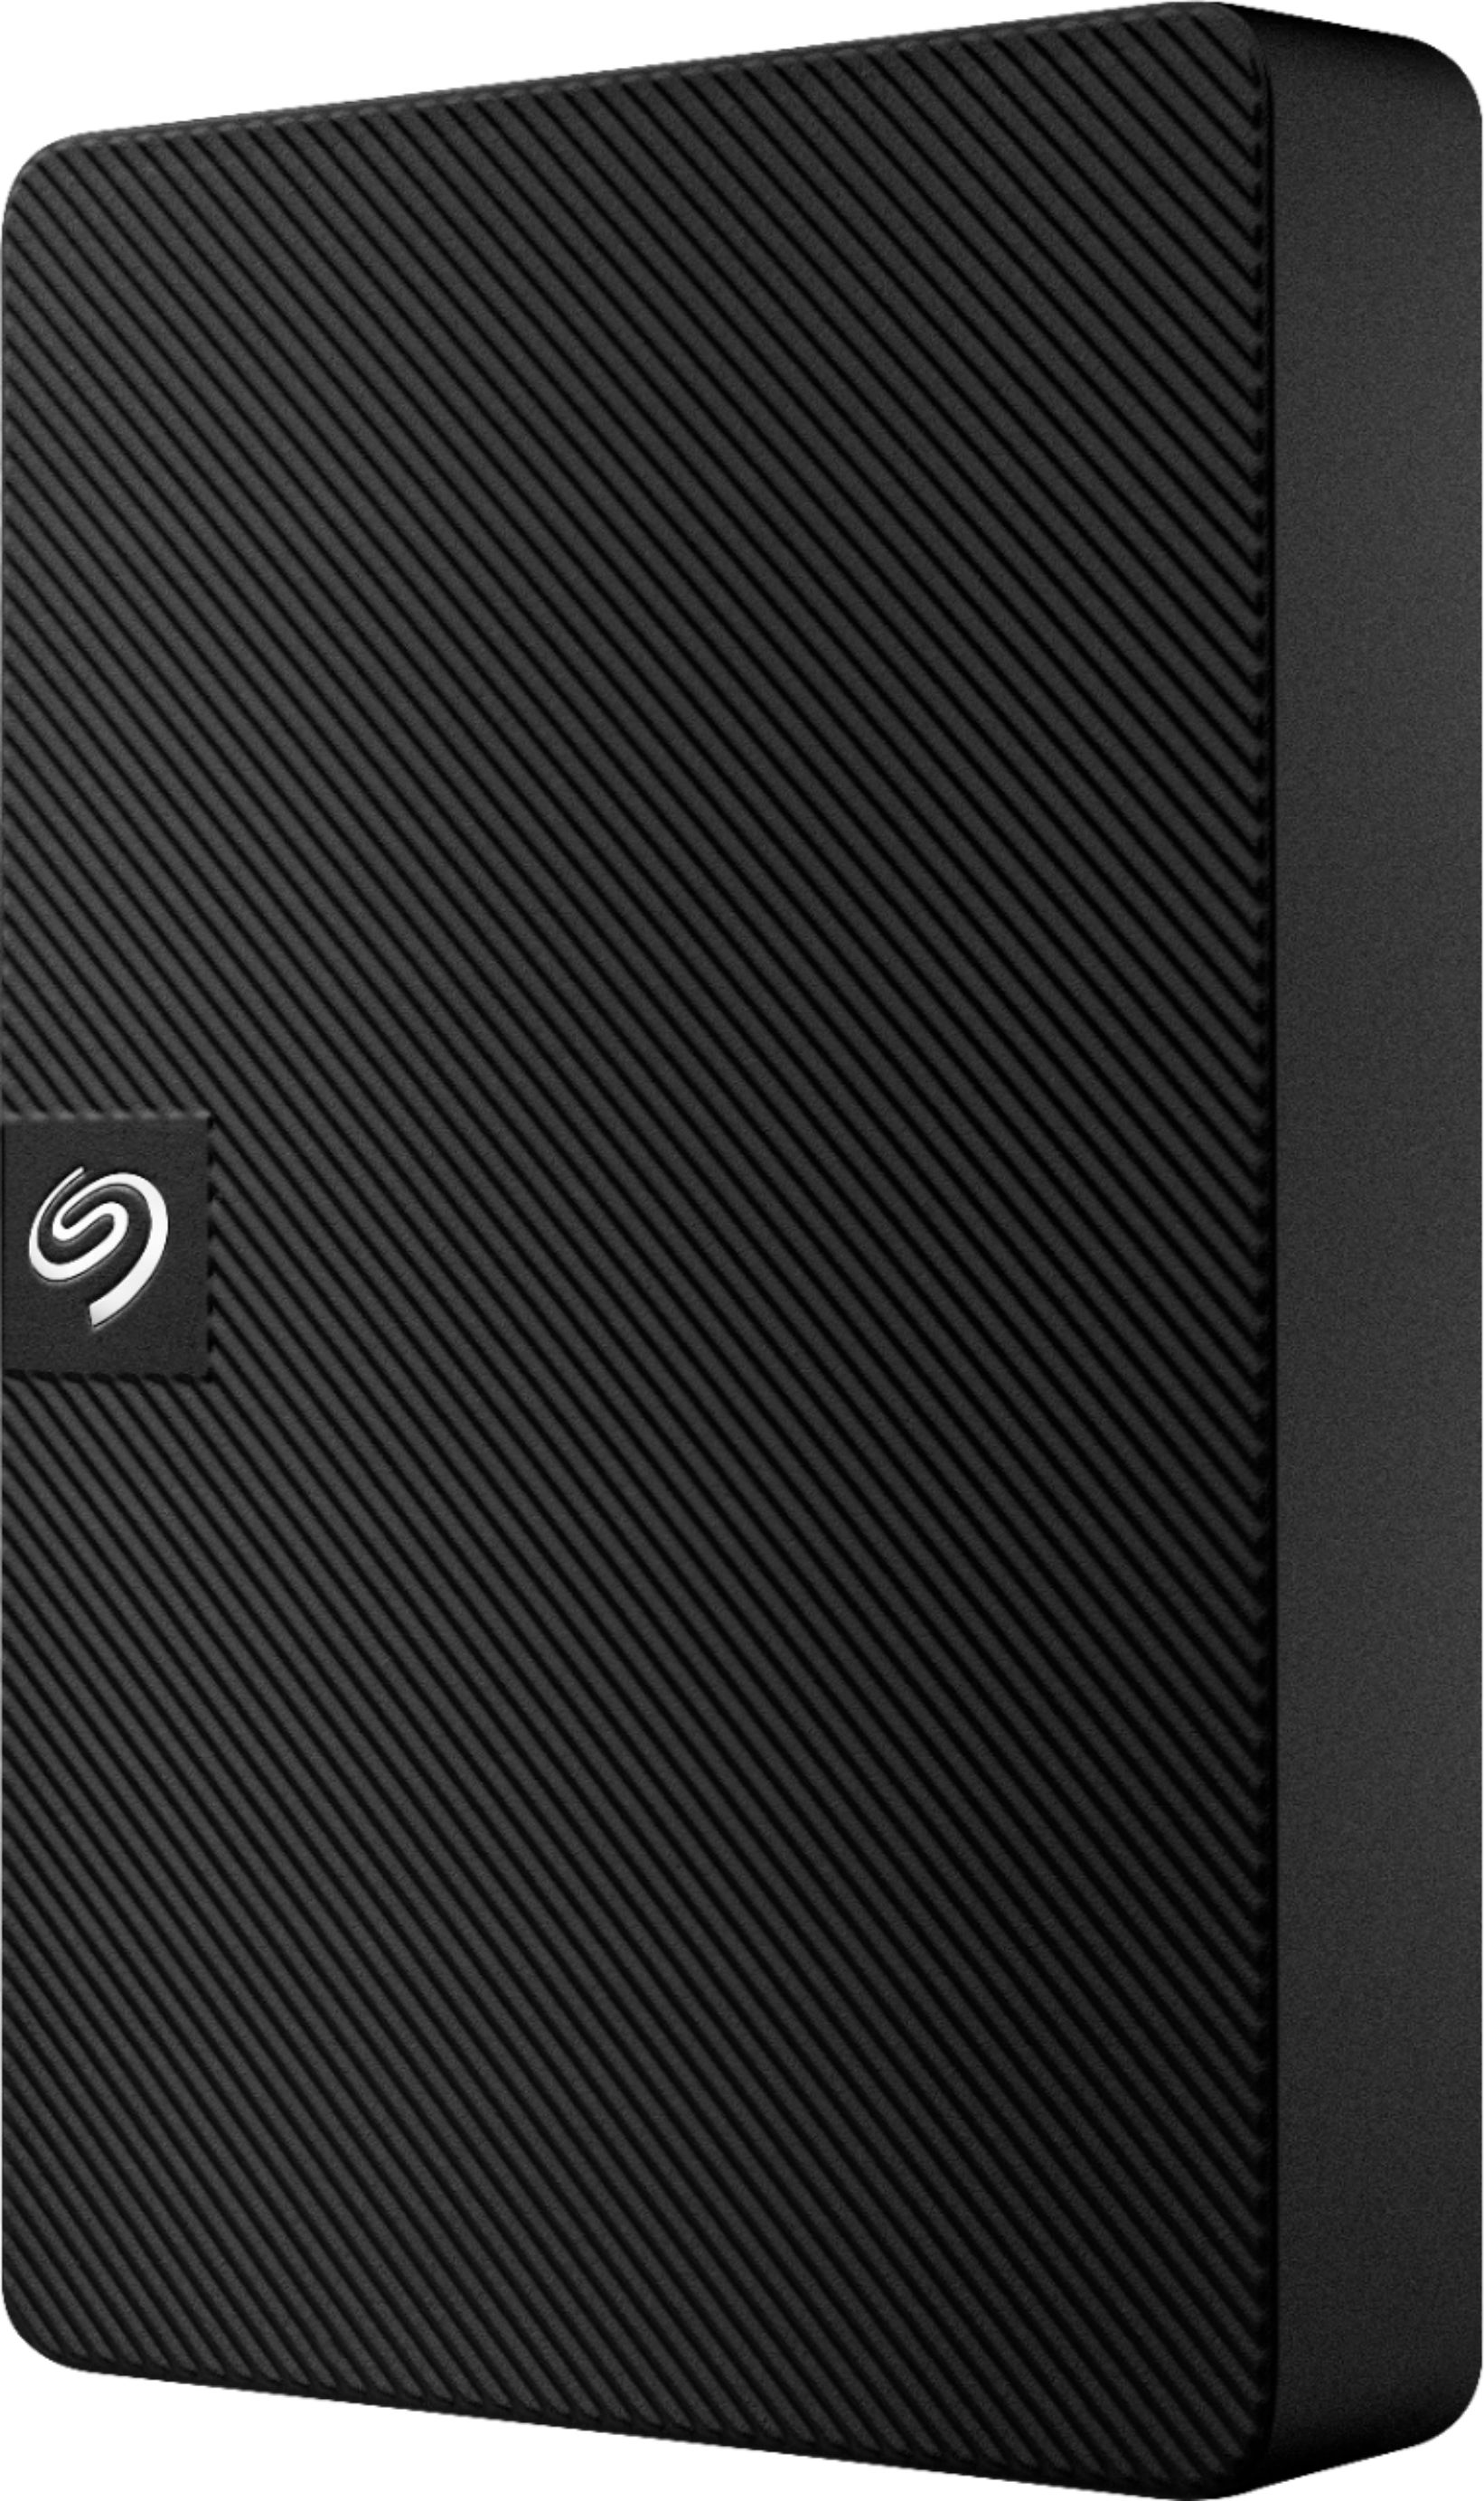 håndjern Blinke Empirisk Seagate Expansion 4TB External USB 3.0 Portable Hard Drive with Rescue Data  Recovery Services Black STKM4000400 - Best Buy